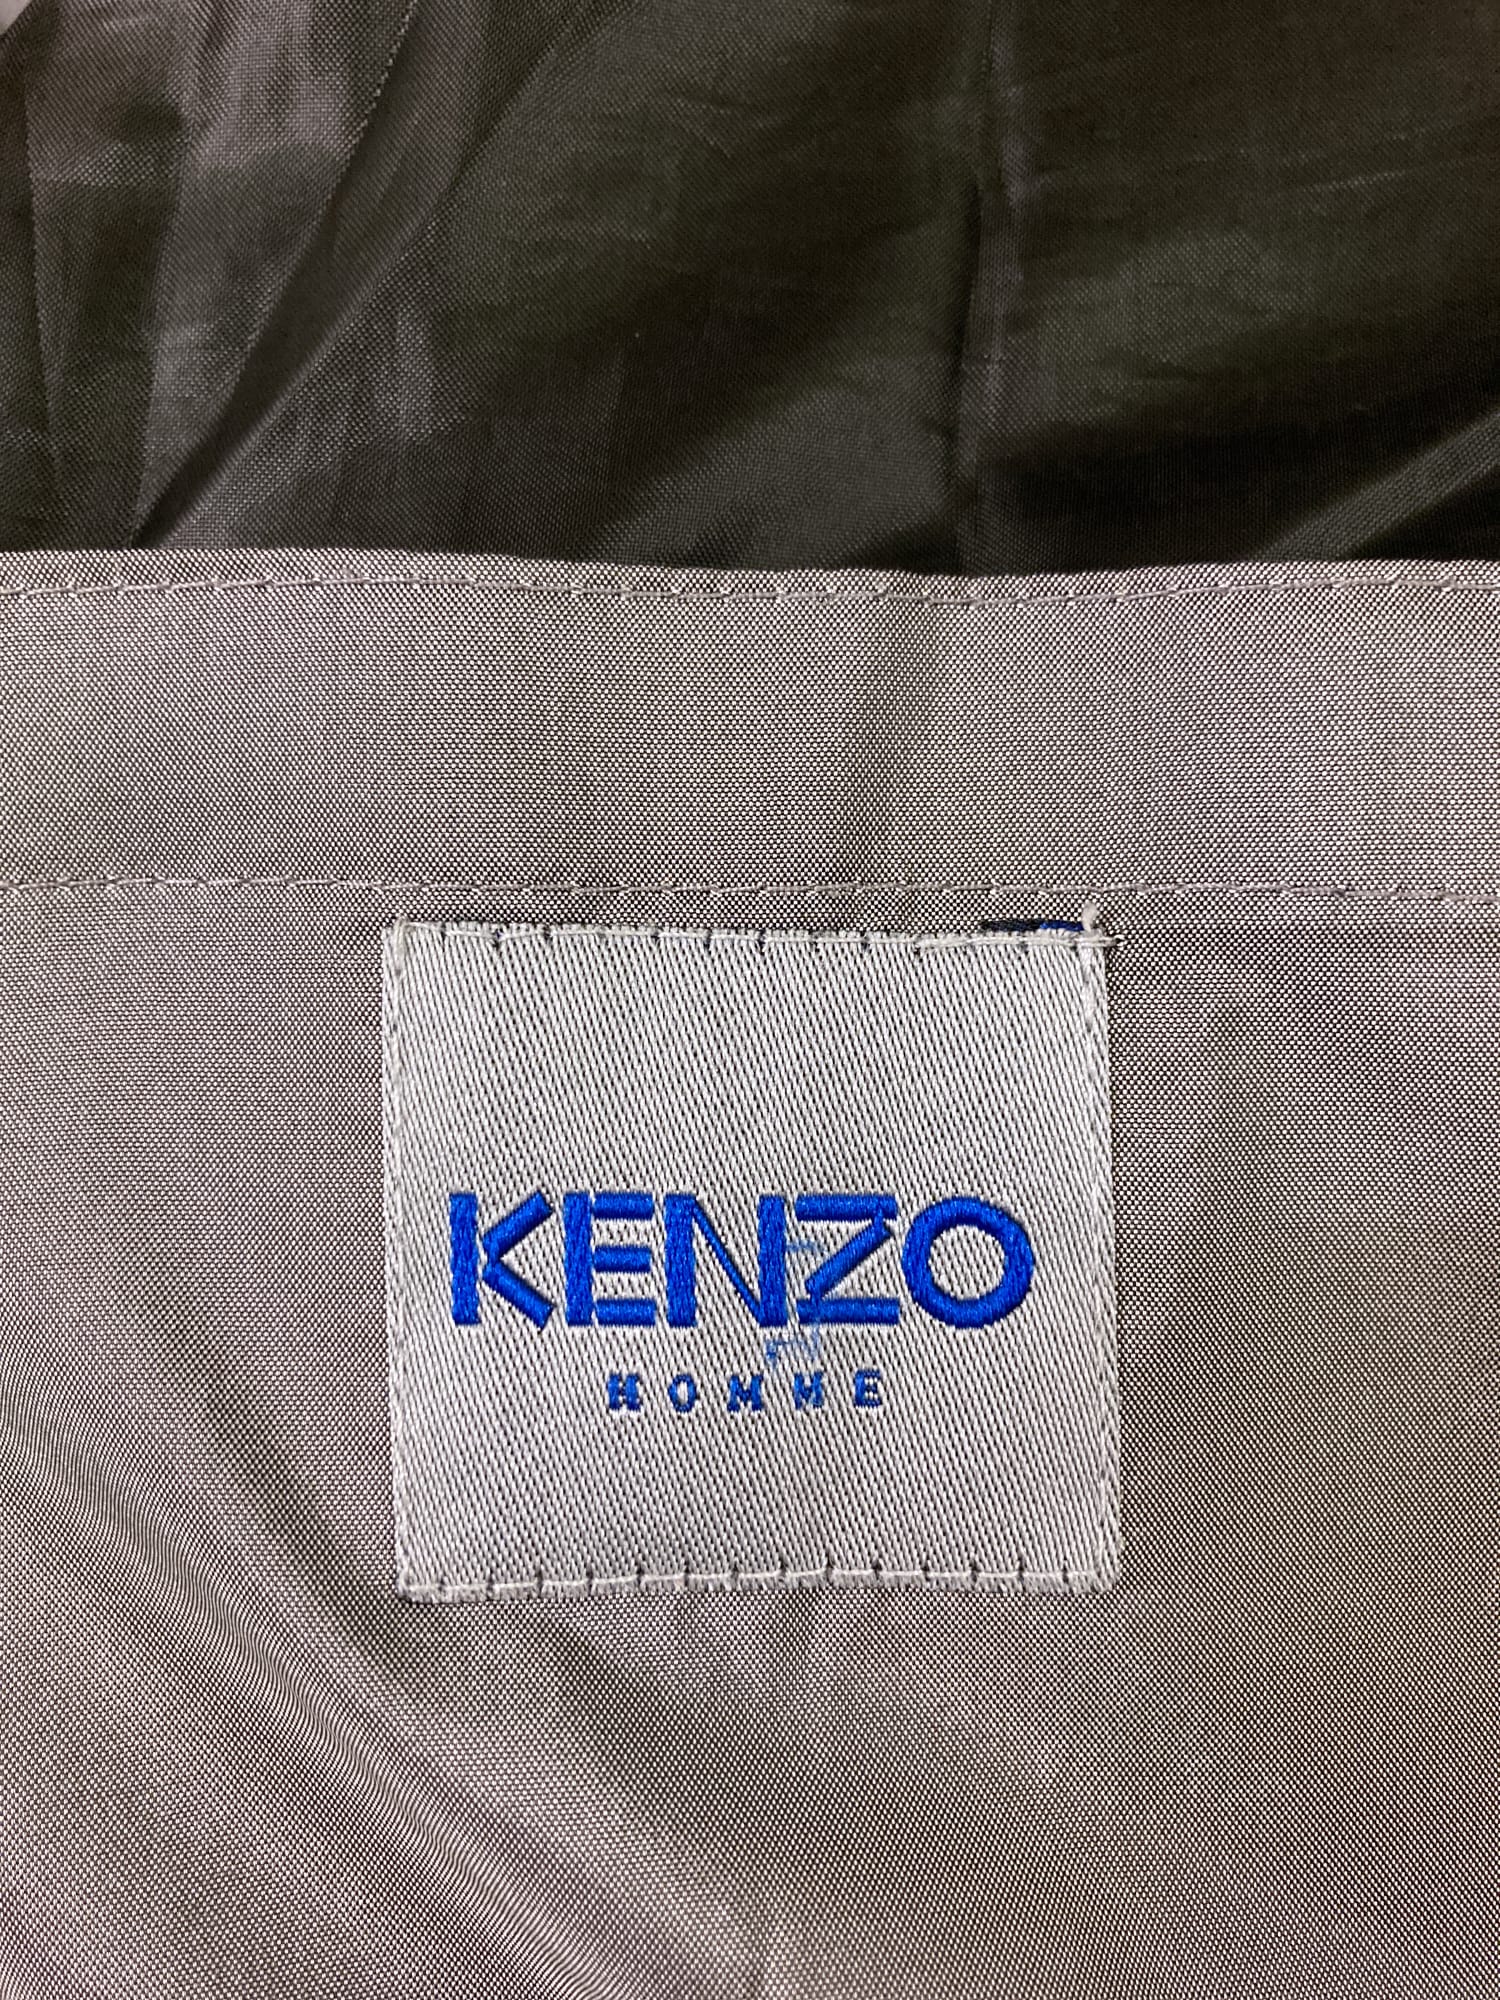 Kenzo Homme 1990s shiny silver hooded down puffer coat - size 3 L